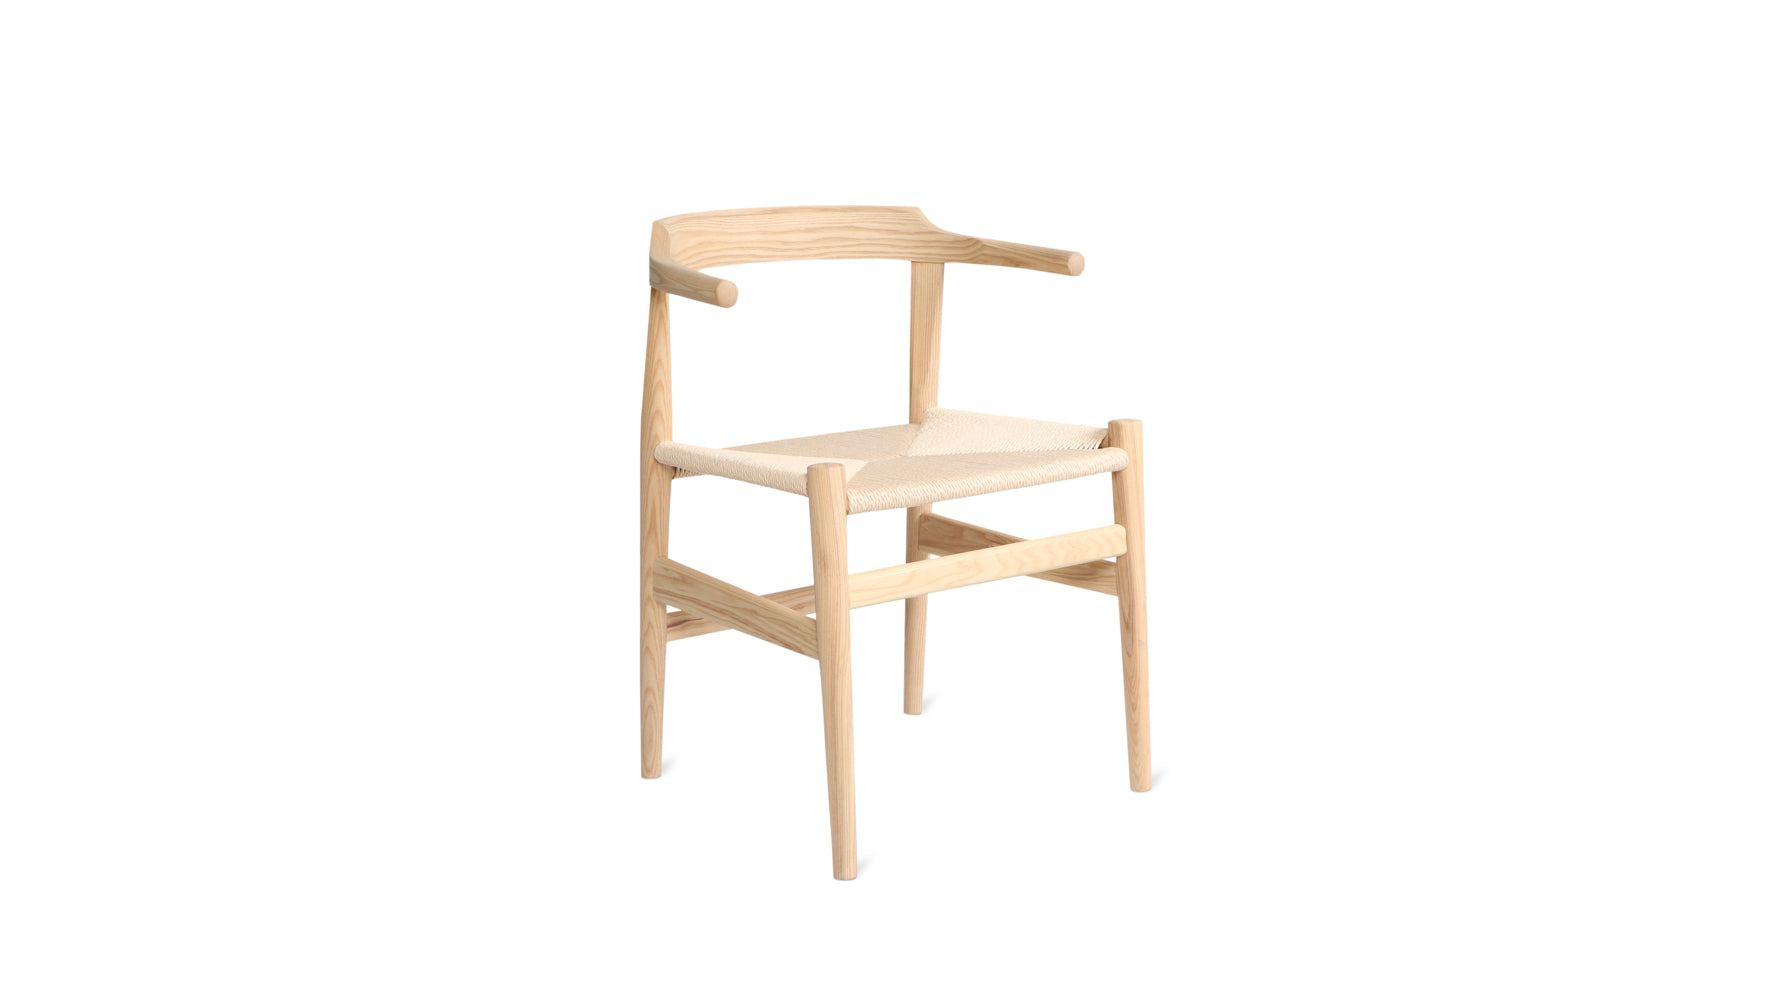 Tuck In Dining Chair, White Ash, Natural Papercord Seat - Image 4